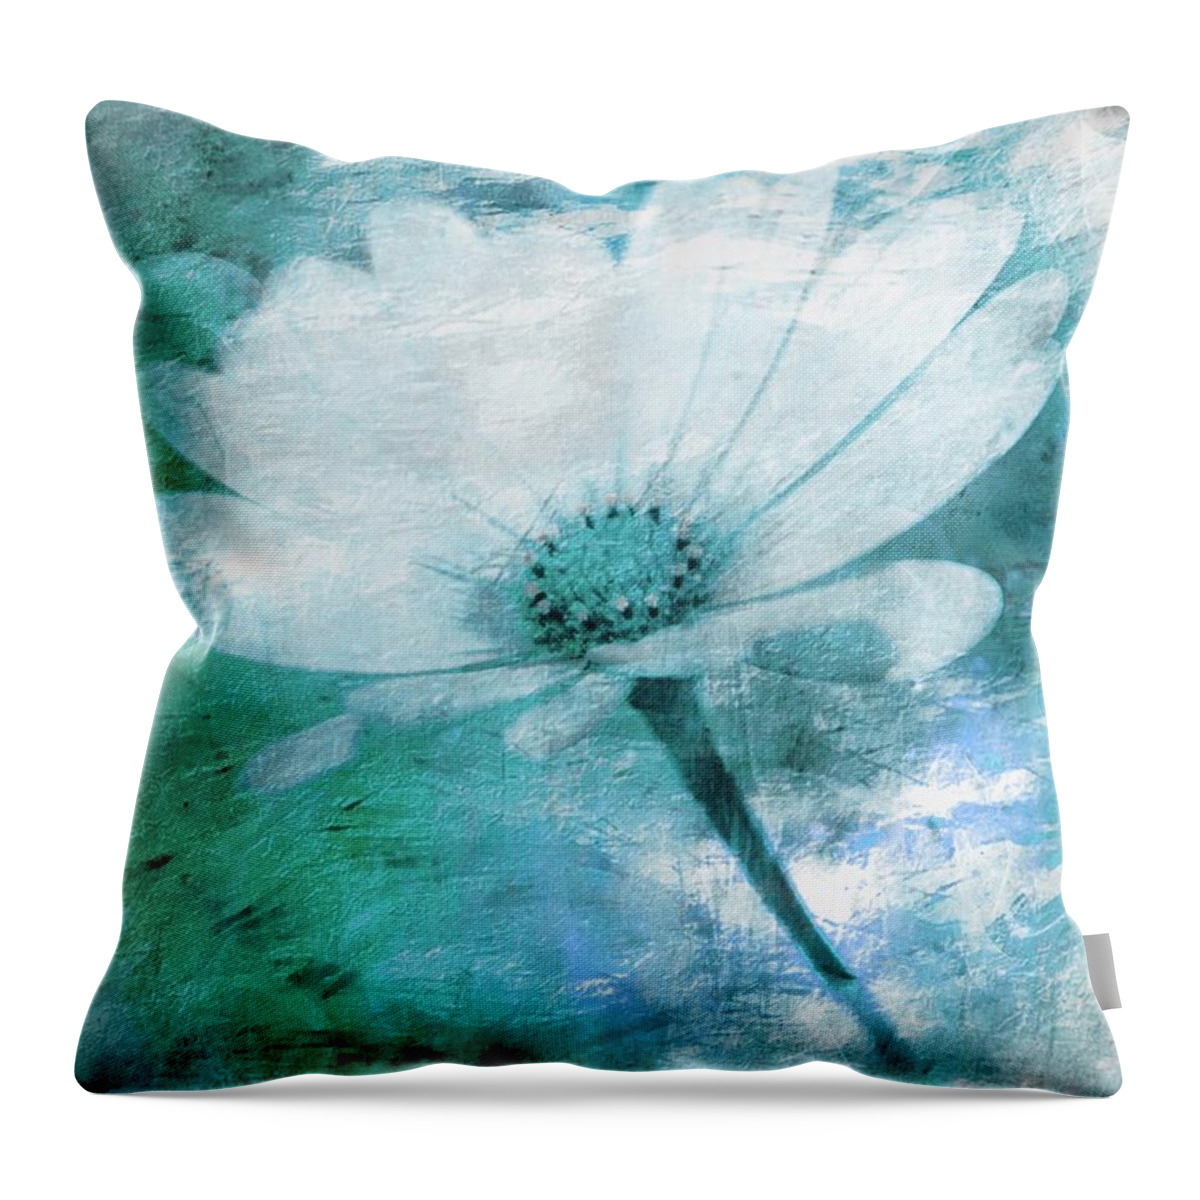 Daisy Throw Pillow featuring the photograph Just A Daisy by Clare Bevan